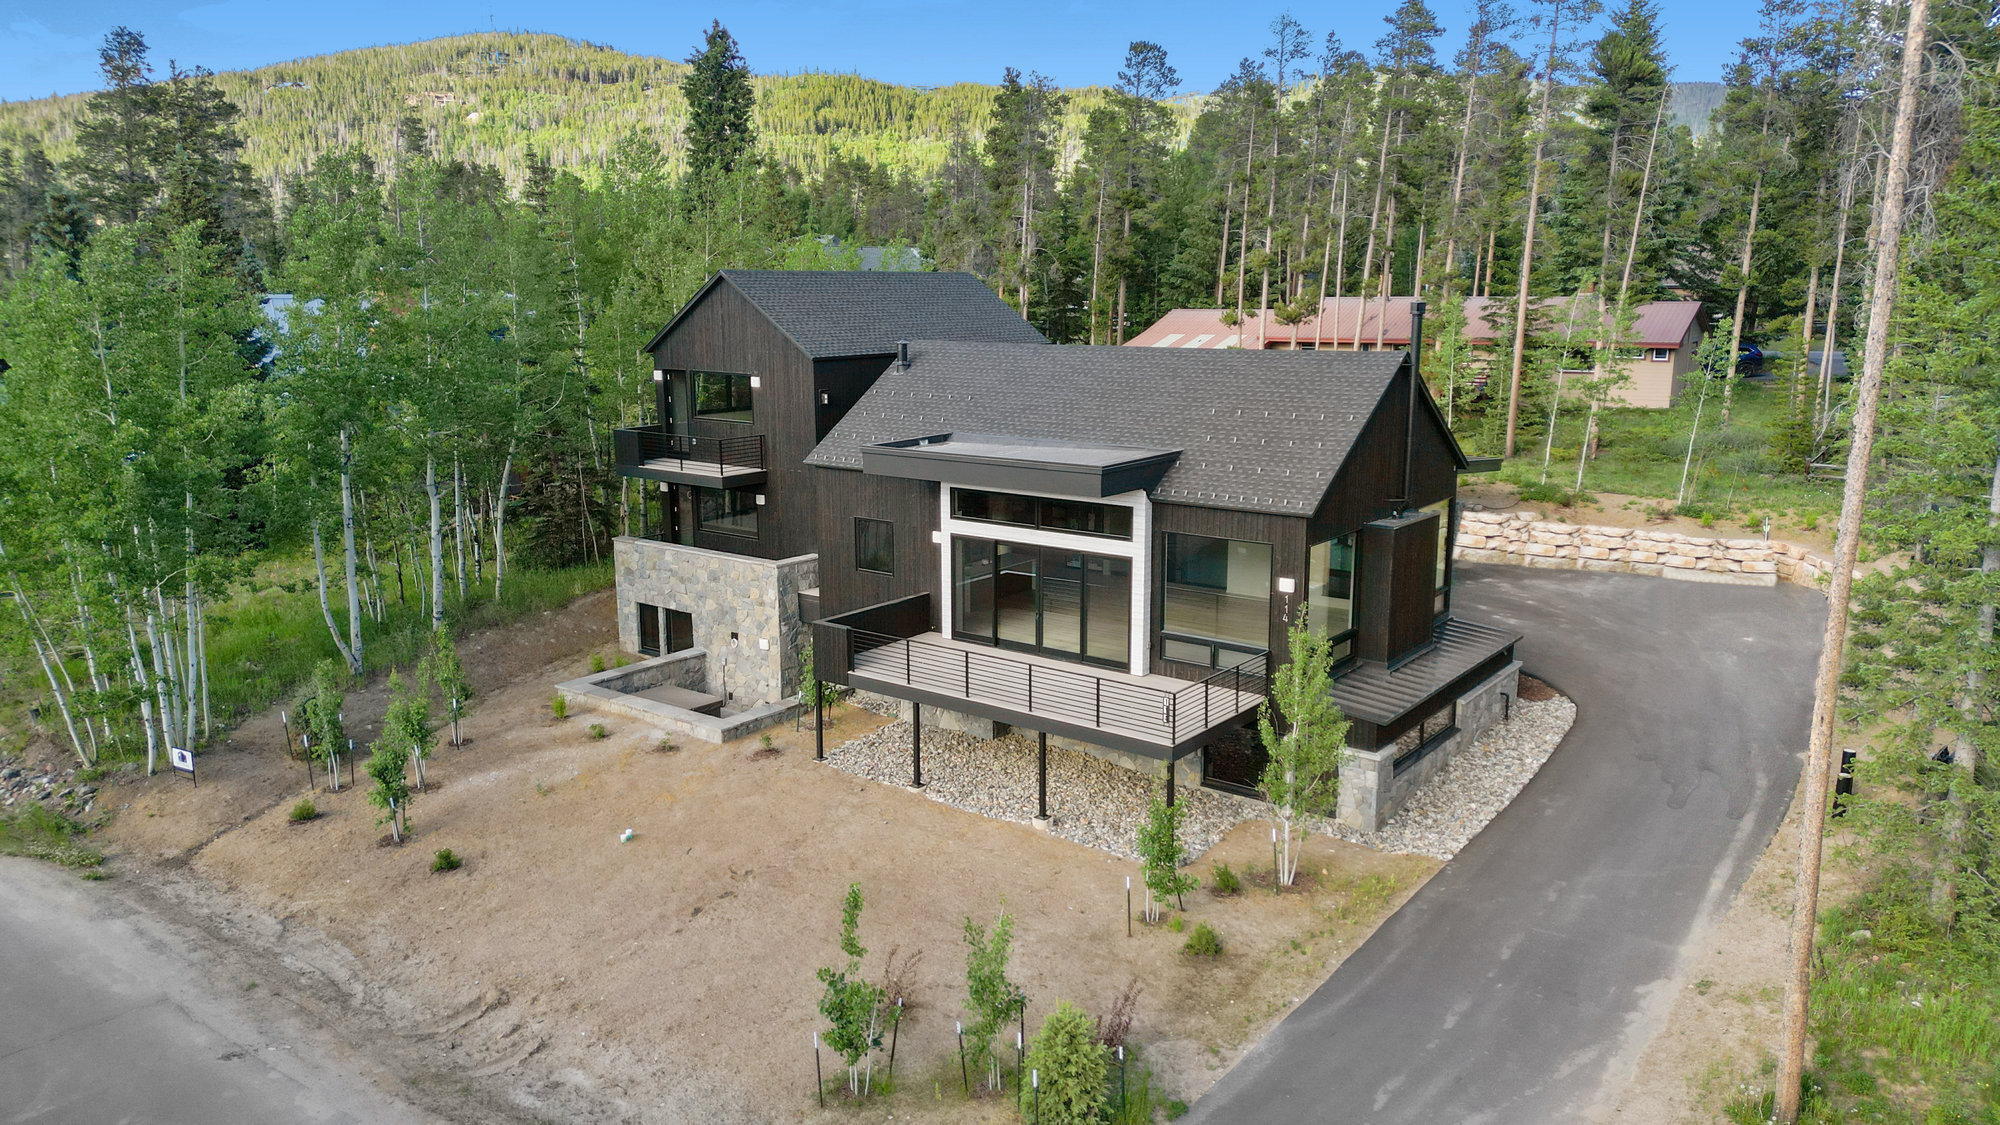 Legacy home for sale in the Gold Flake neighborhood in Breckenridge, Colorado